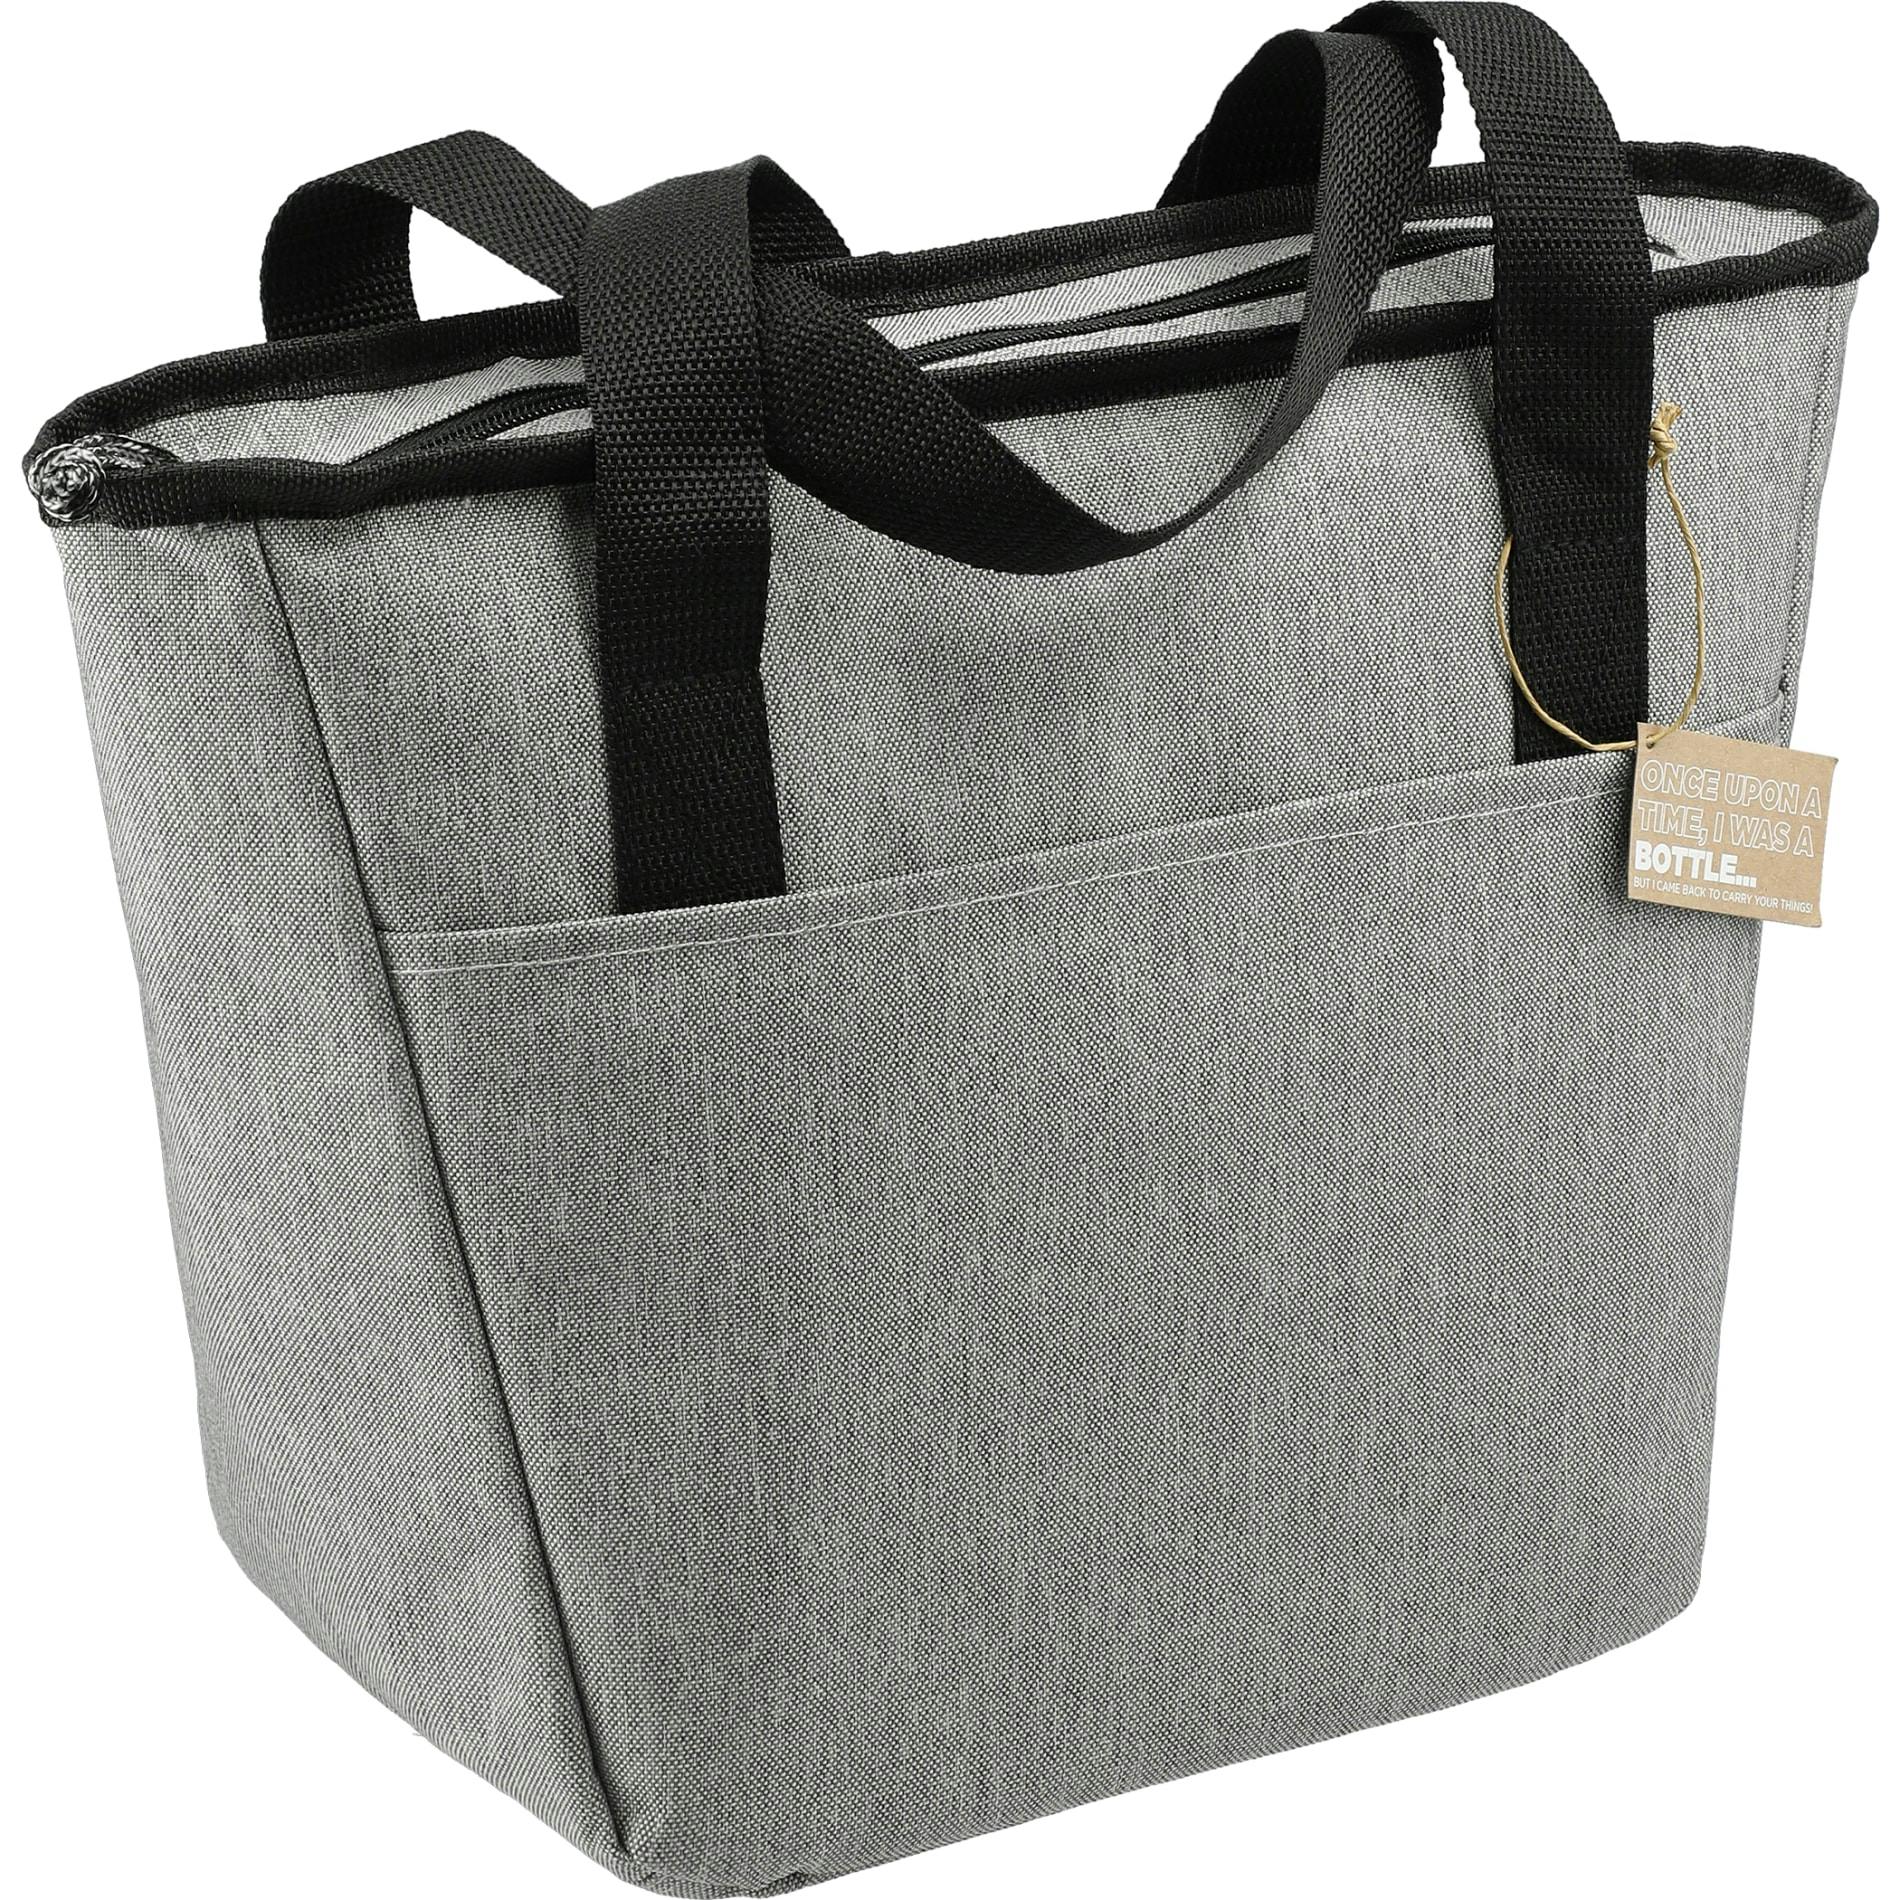 Merchant & Craft Revive Recycled 9 Can Tote Cooler - additional Image 4